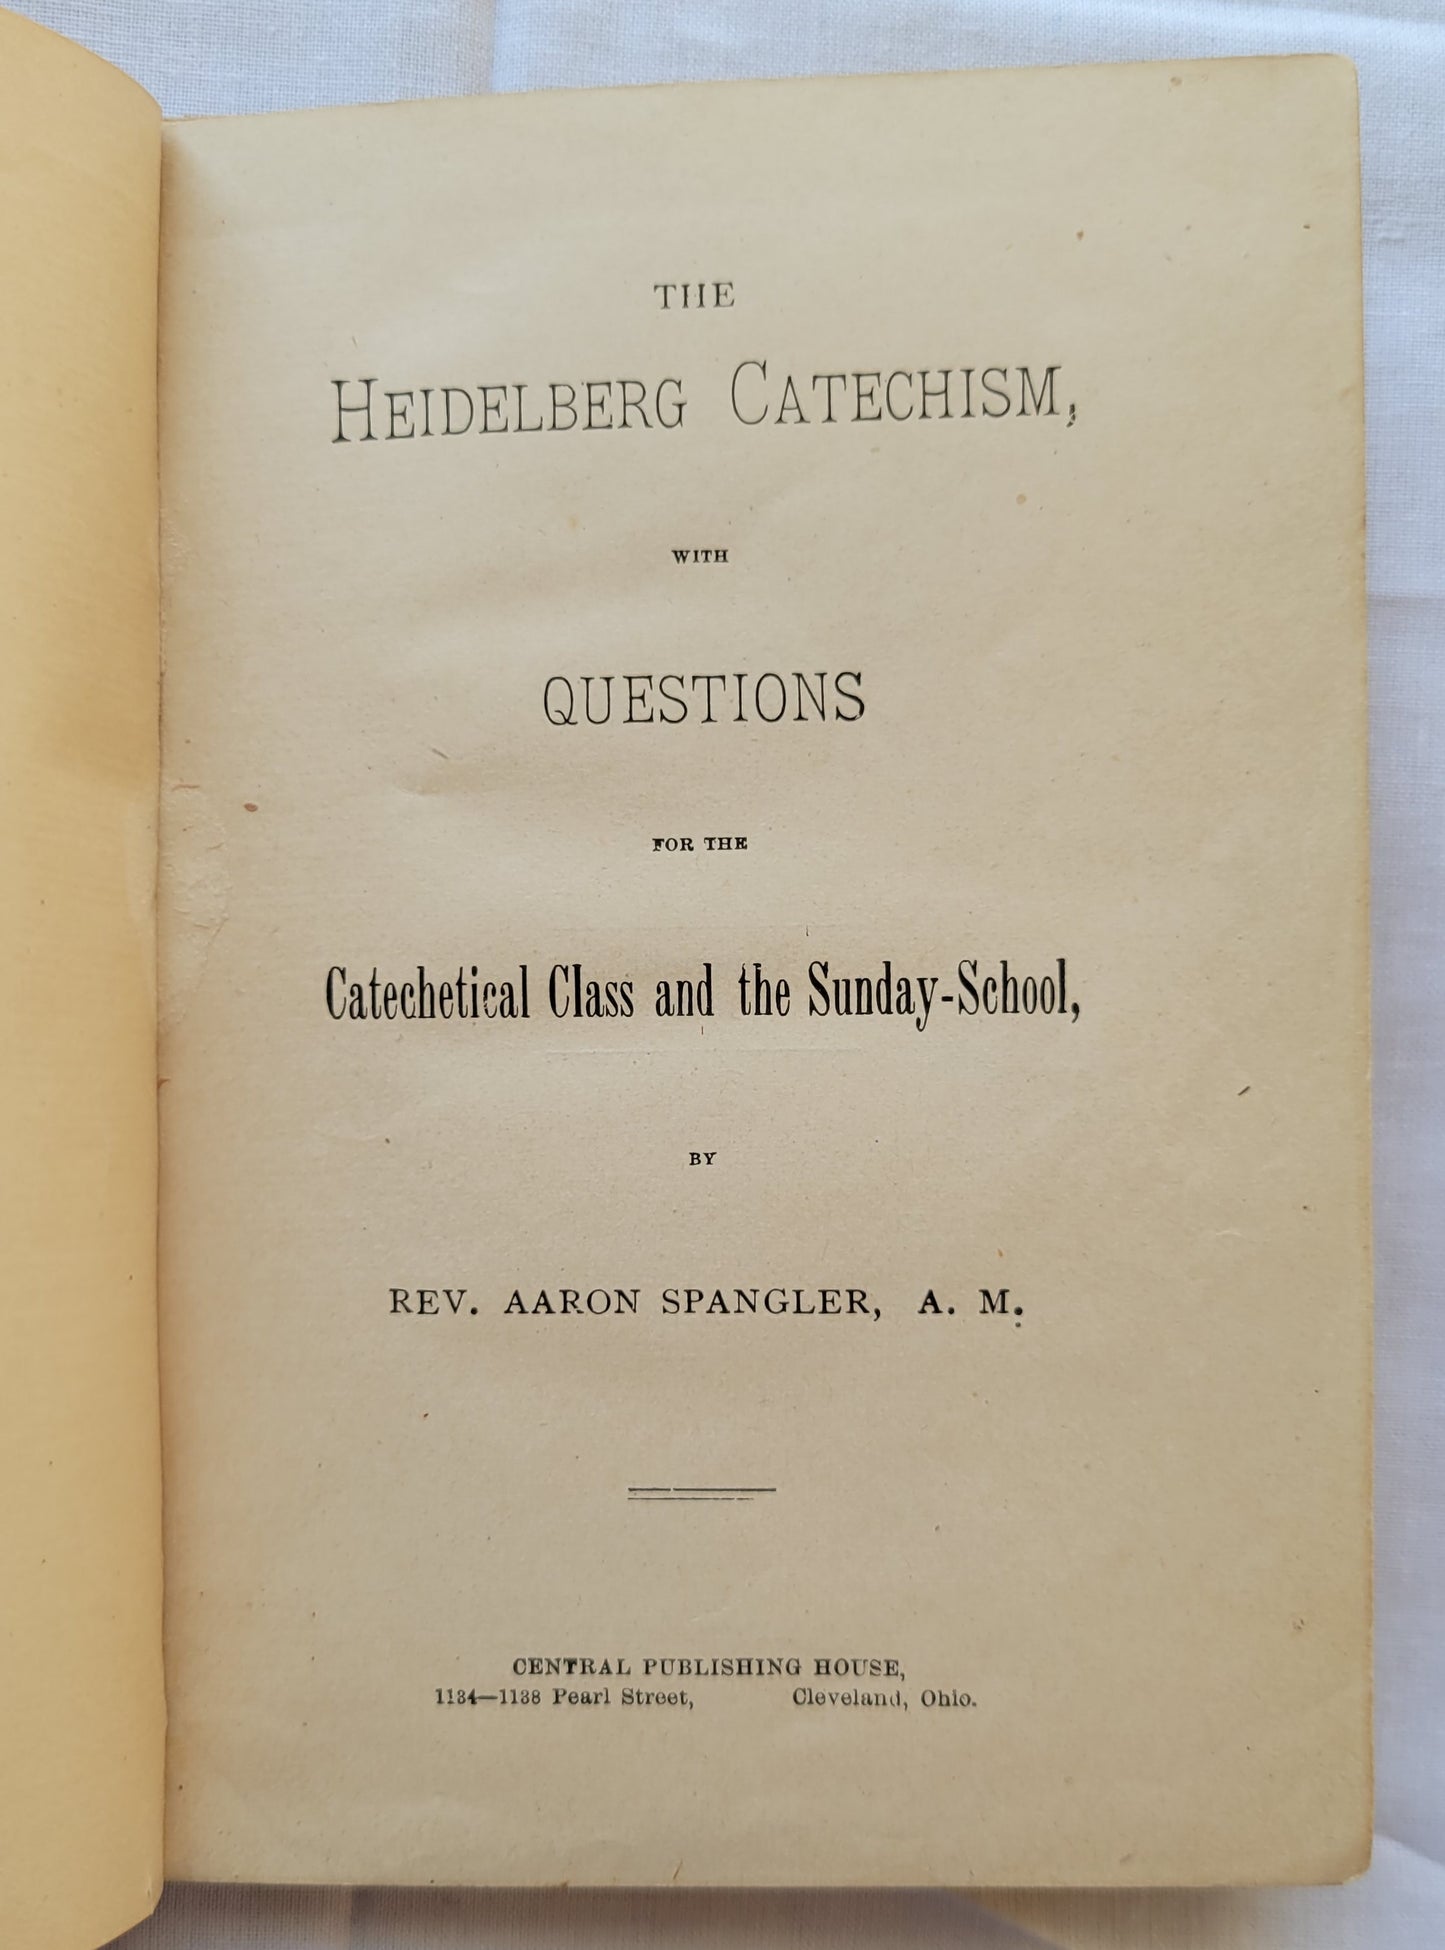 Antique book for sale "The Heidelberg Catechism: With Questions for the Catechetical Class and the Sunday-School by Rec. Aaron Spangler, A.M.", published in 1899 by the Central Publishing House. Title page.